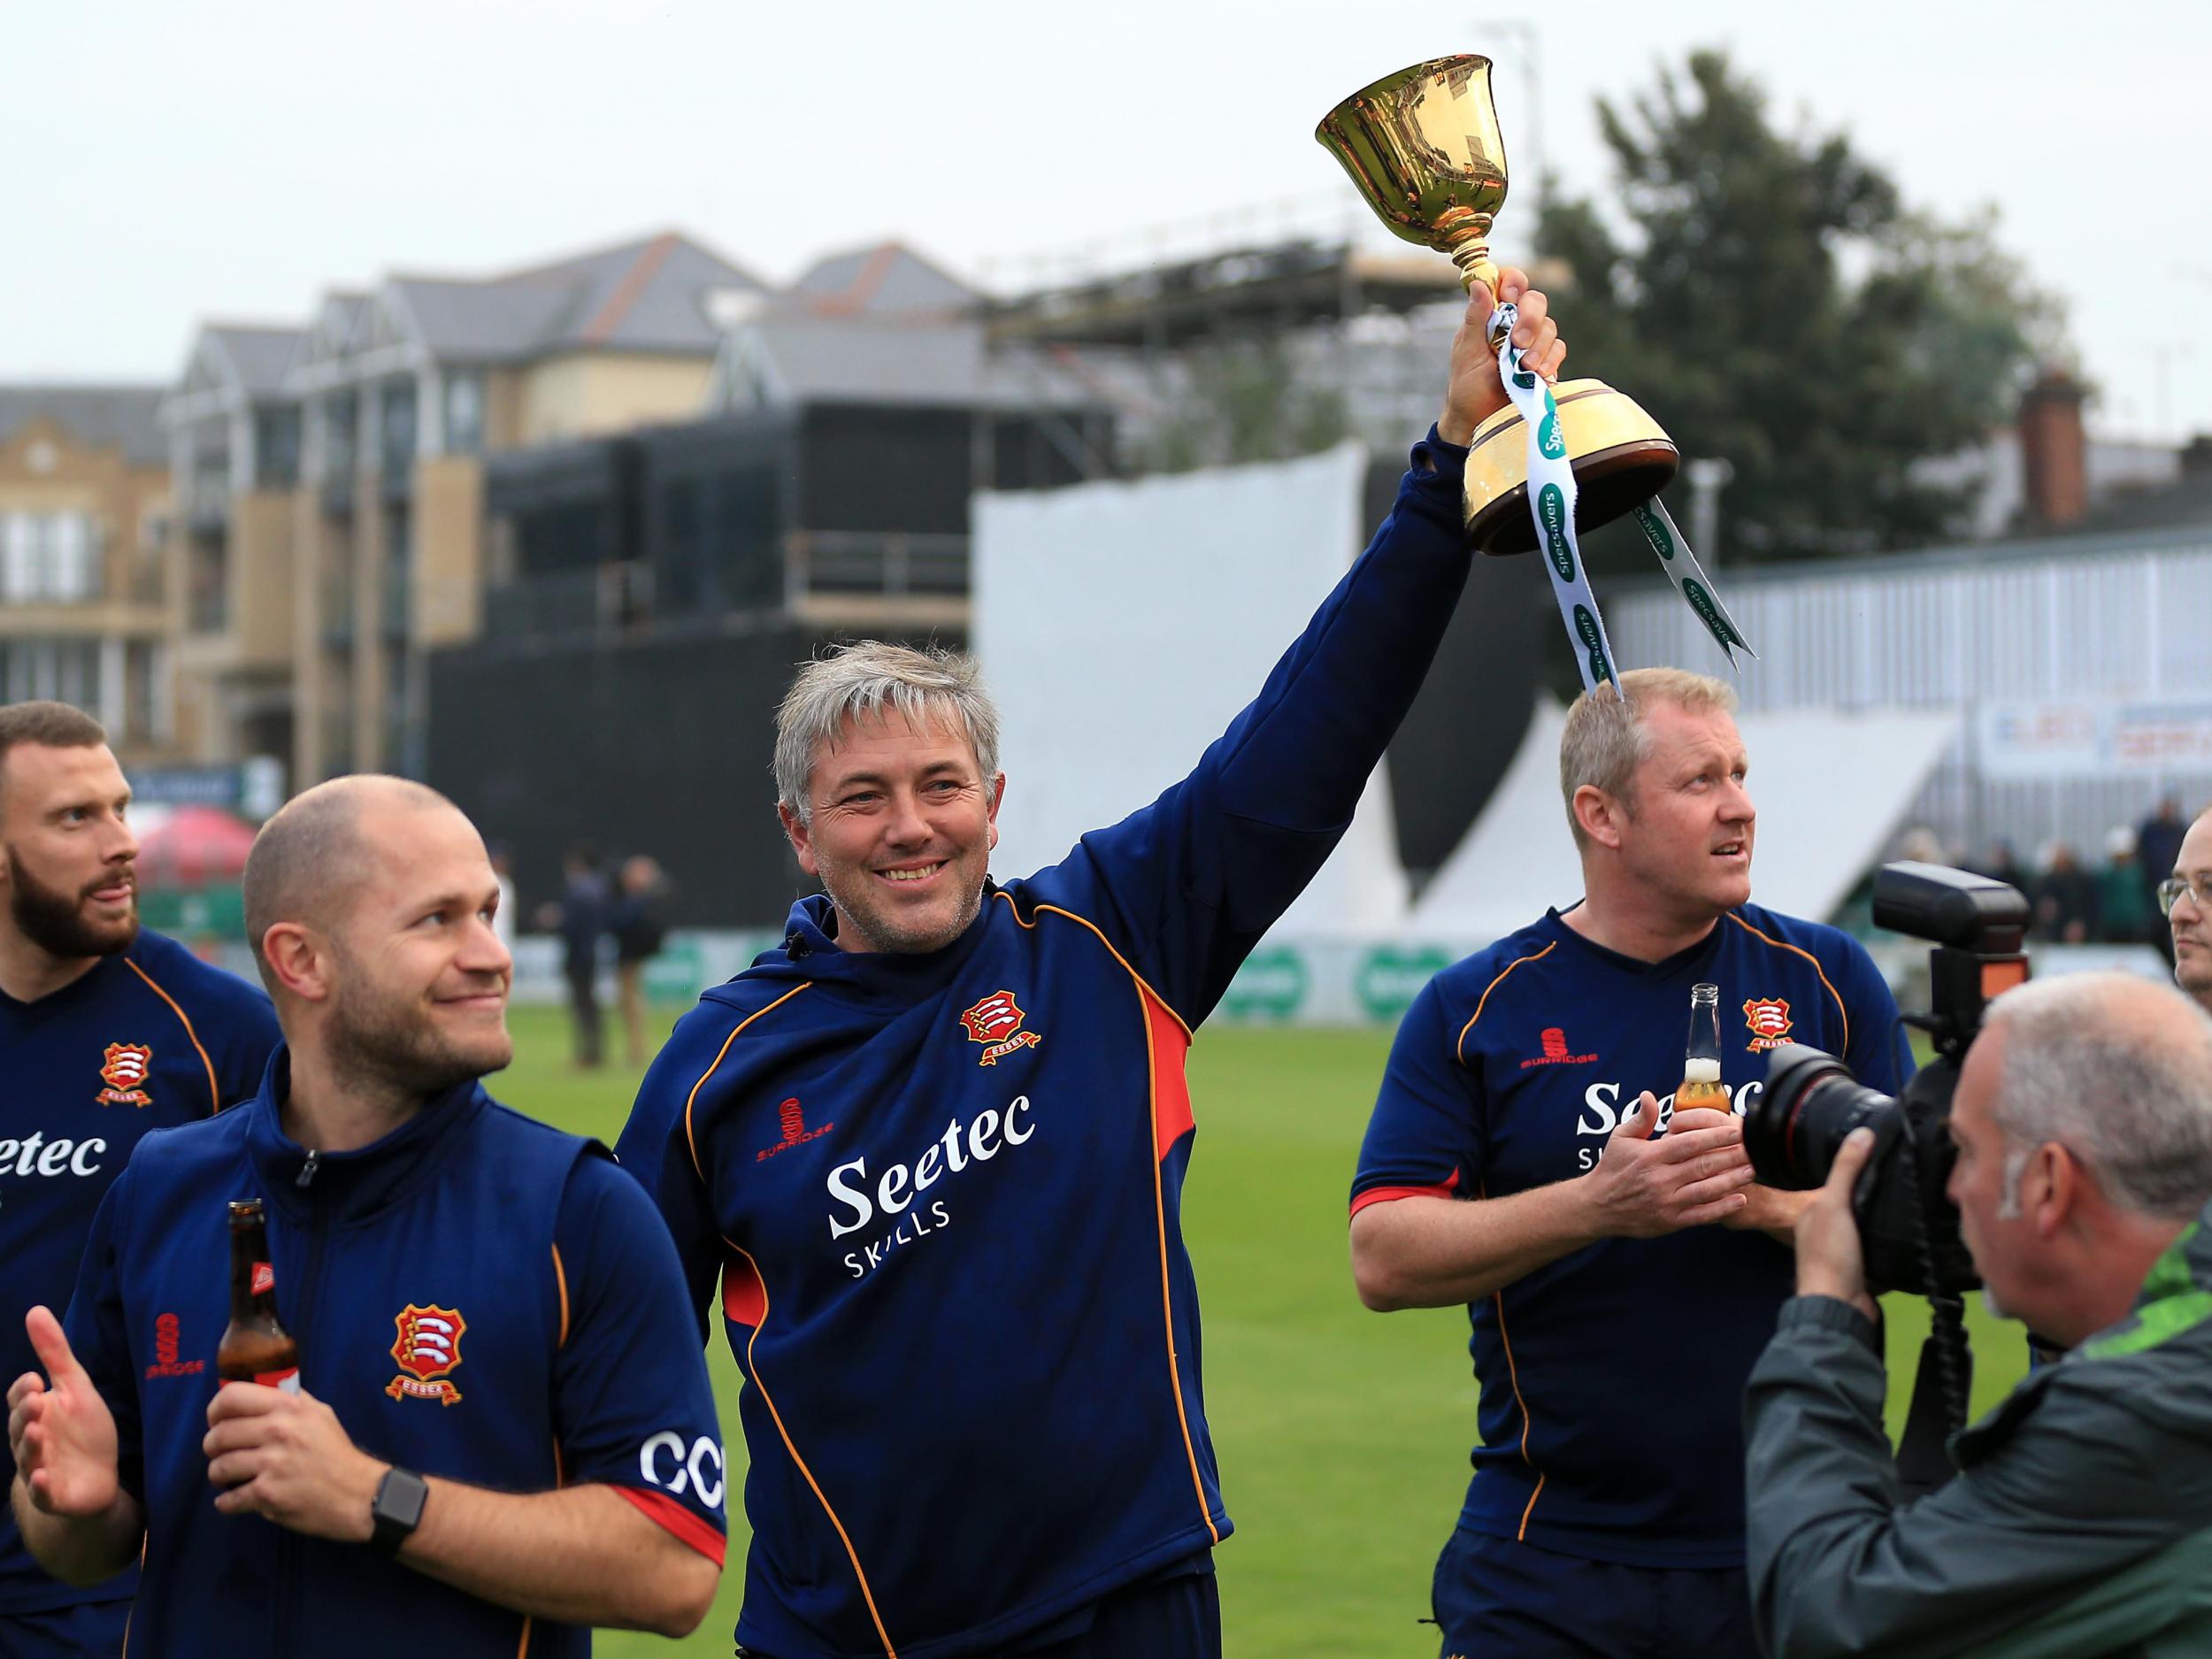 Silverwood guided Essex to the County Championship Division One title in 2017